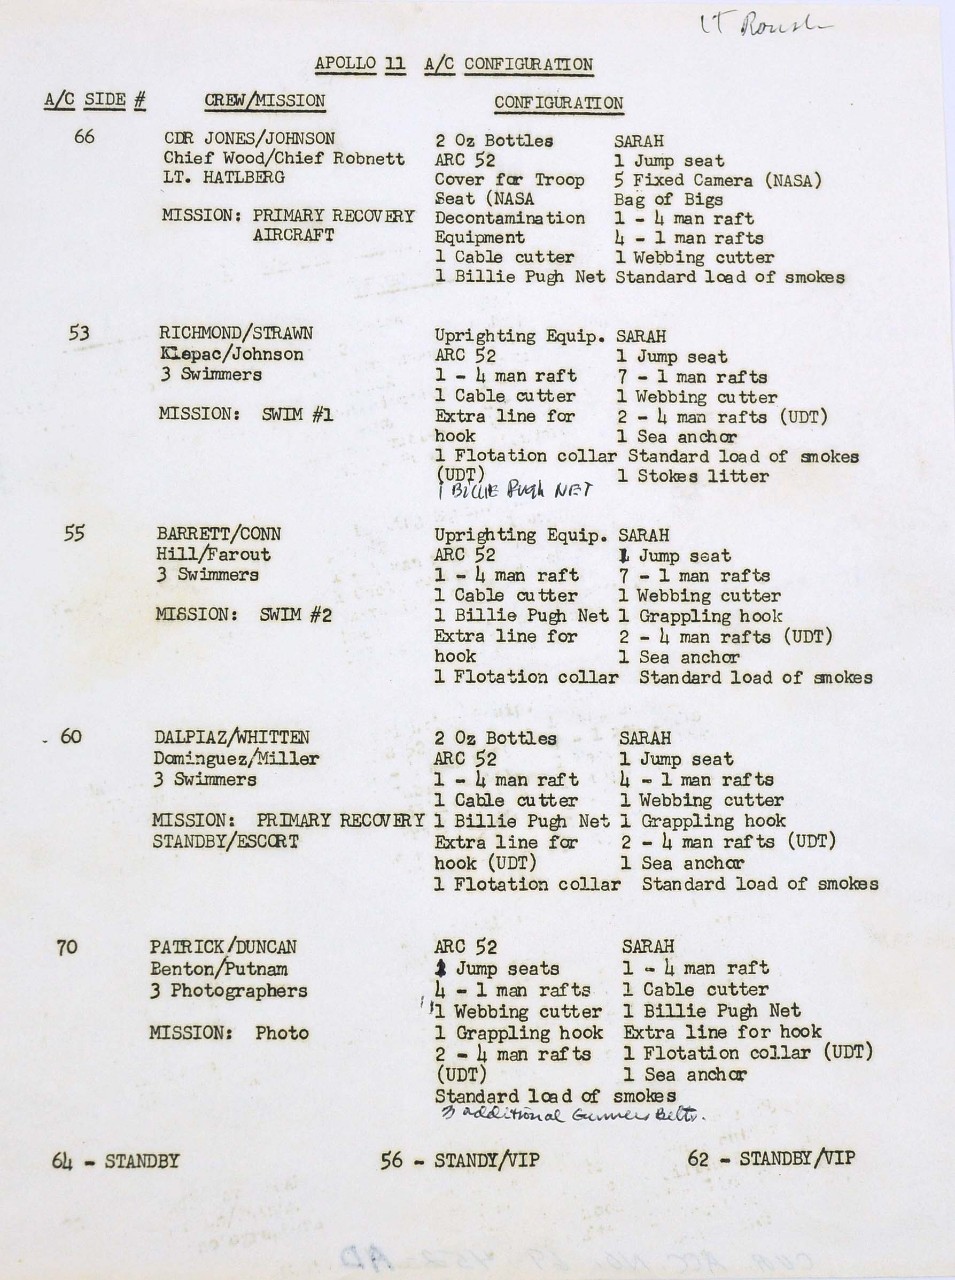 <p>One sheet of paper with typed list of the helicopters, personnel, and equipment required for the recovery of the Apollo 11 astronauts, titled &quot;Apollo 11 A/C Configuration.&quot;</p>
